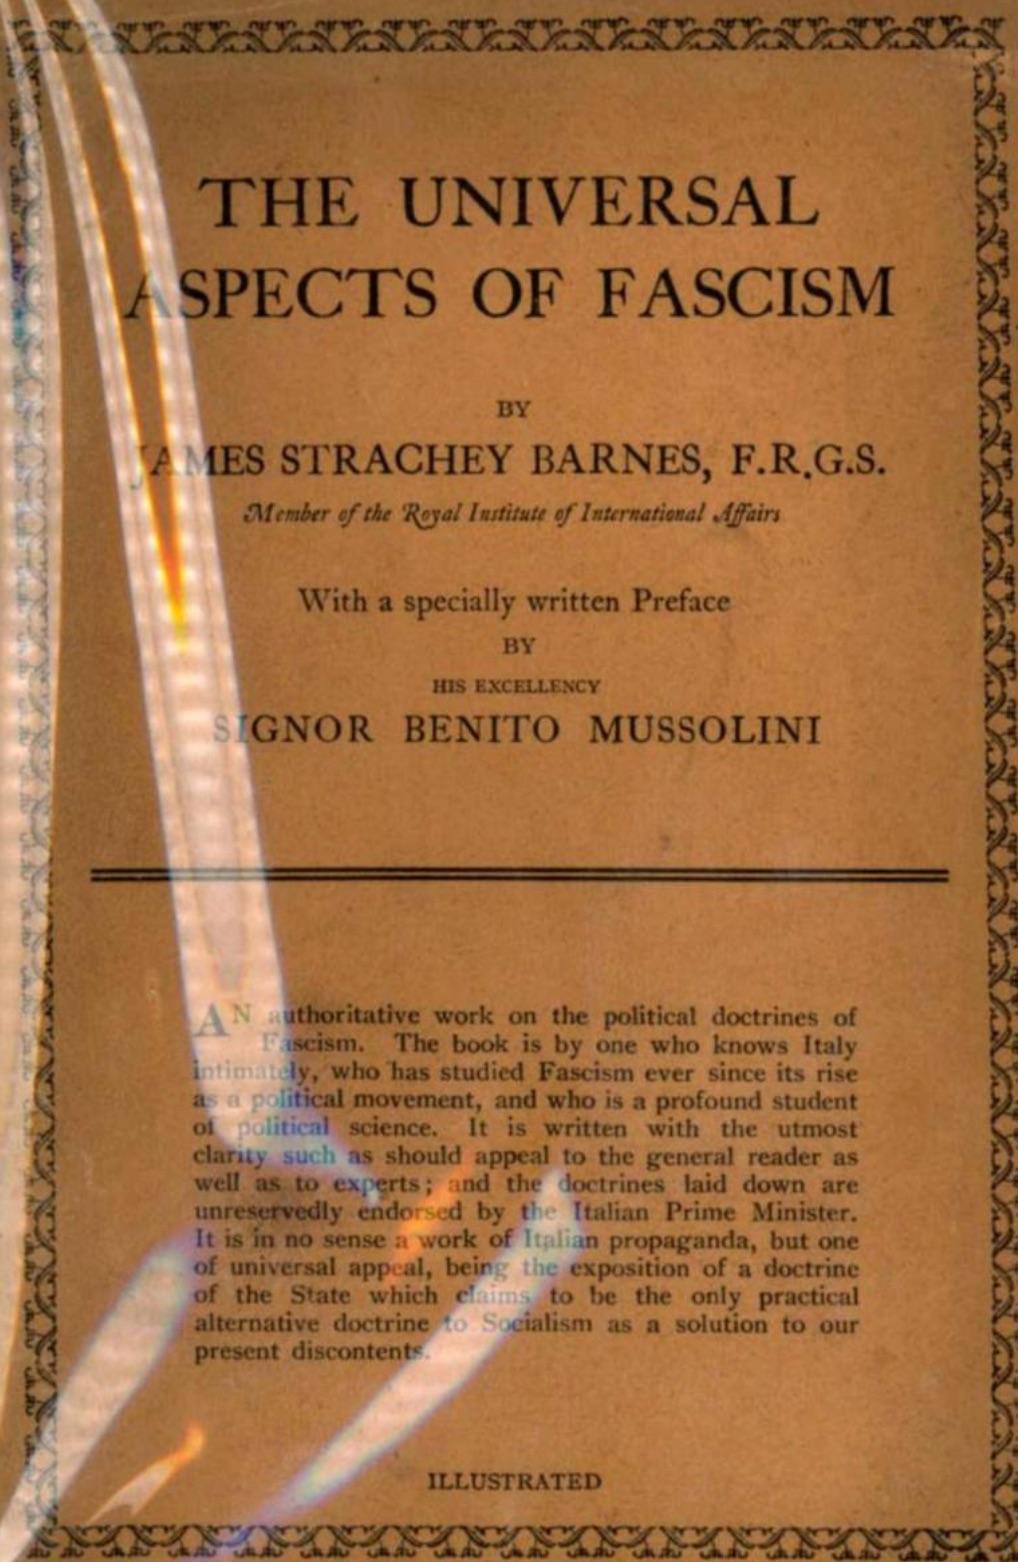 Universal Aspects of Fascism (1928) by James Strachey Barnes & Benito Mussolini